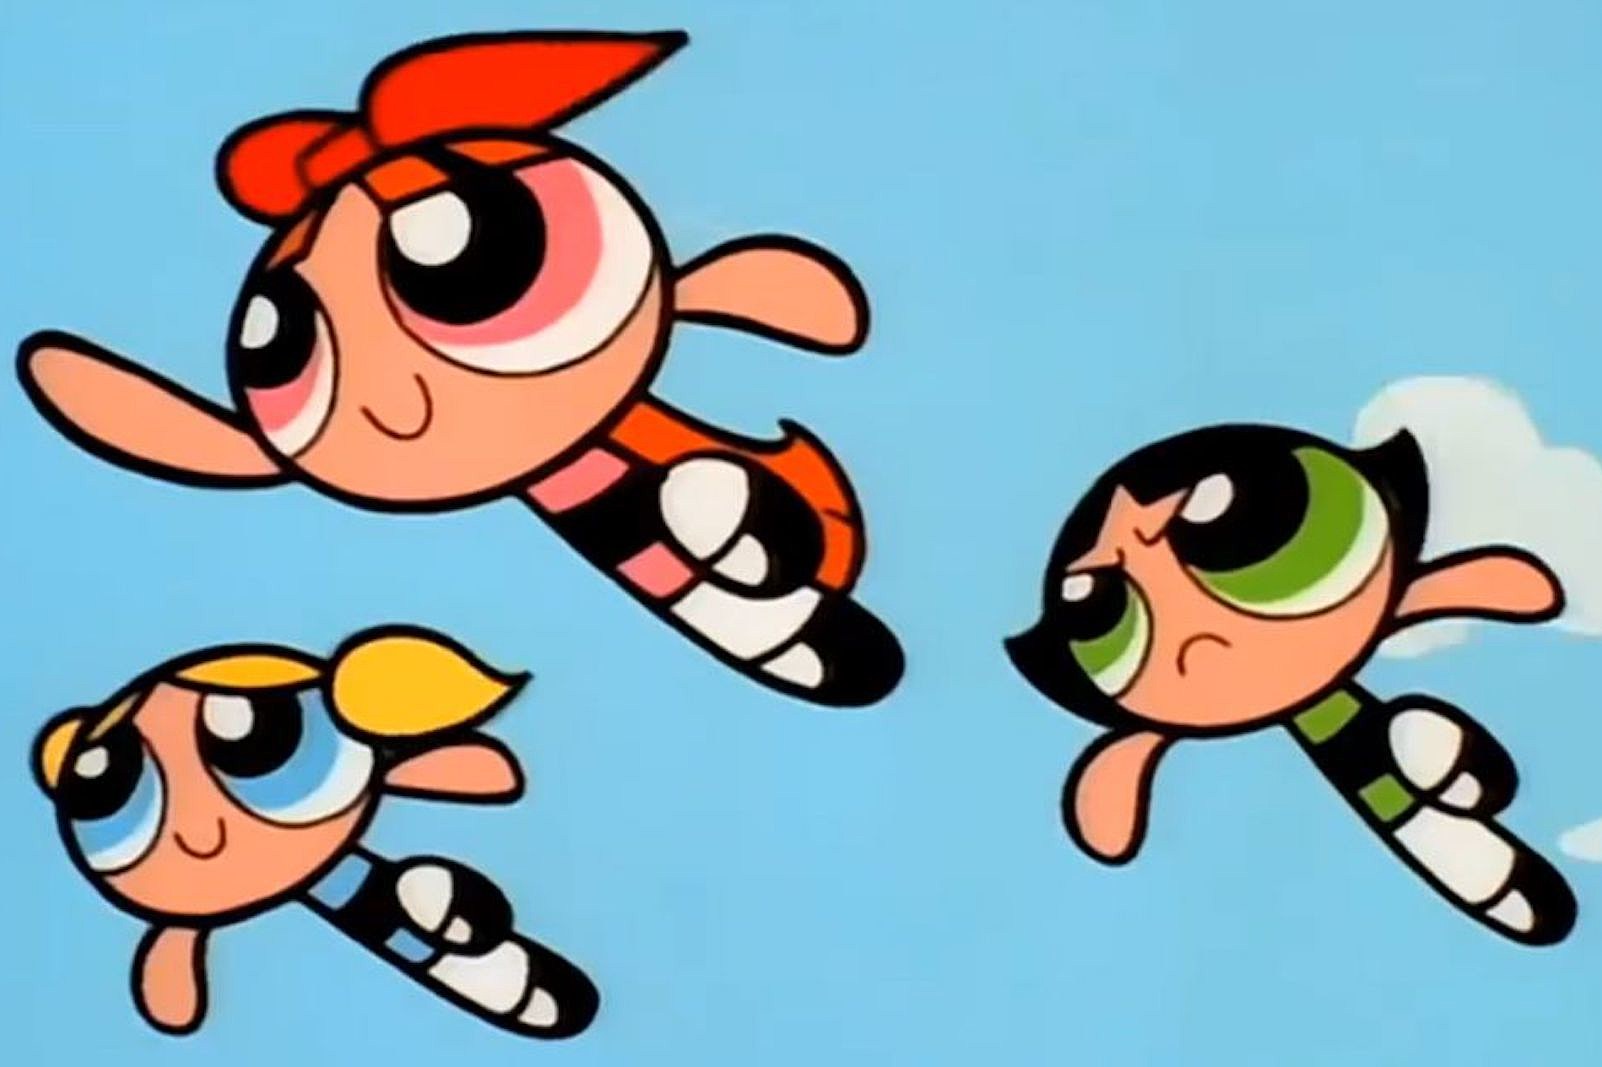 Powerpuff Girls' Are Getting a Grown-Up Live-Action TV Series